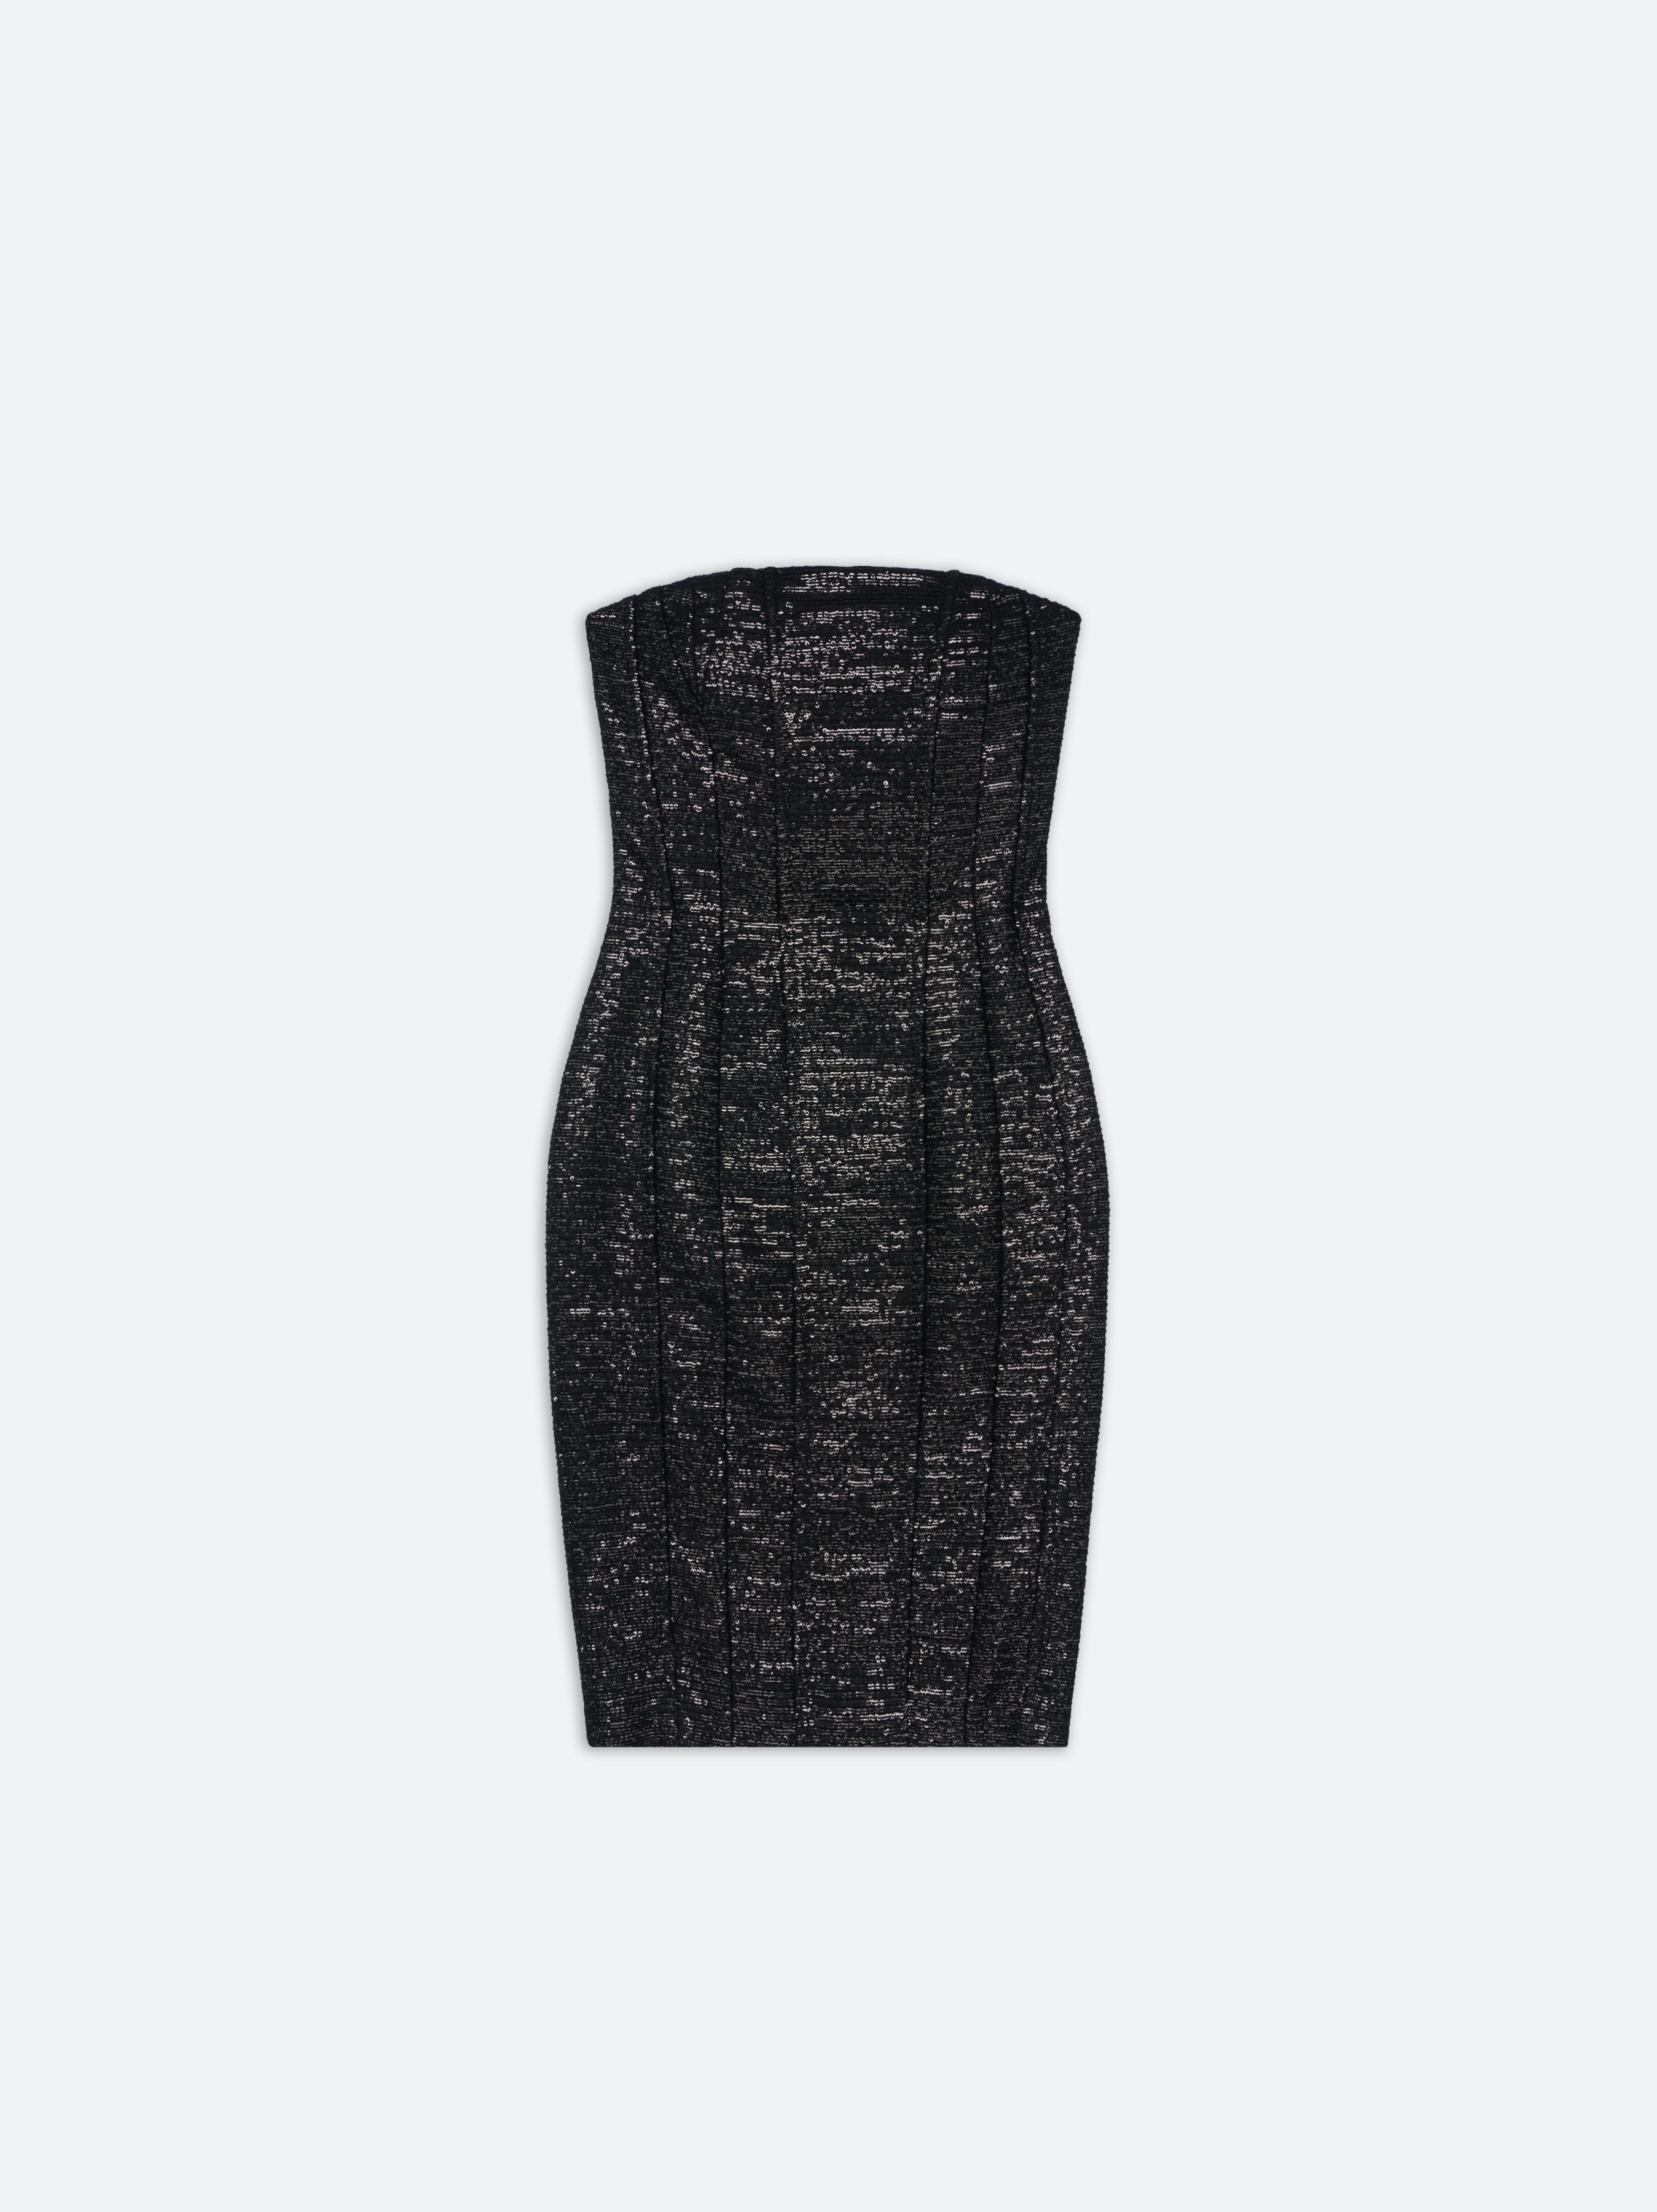 Product WOMEN - CHIFFON SEQUIN MA BUSTIER DRESS - Black featured image